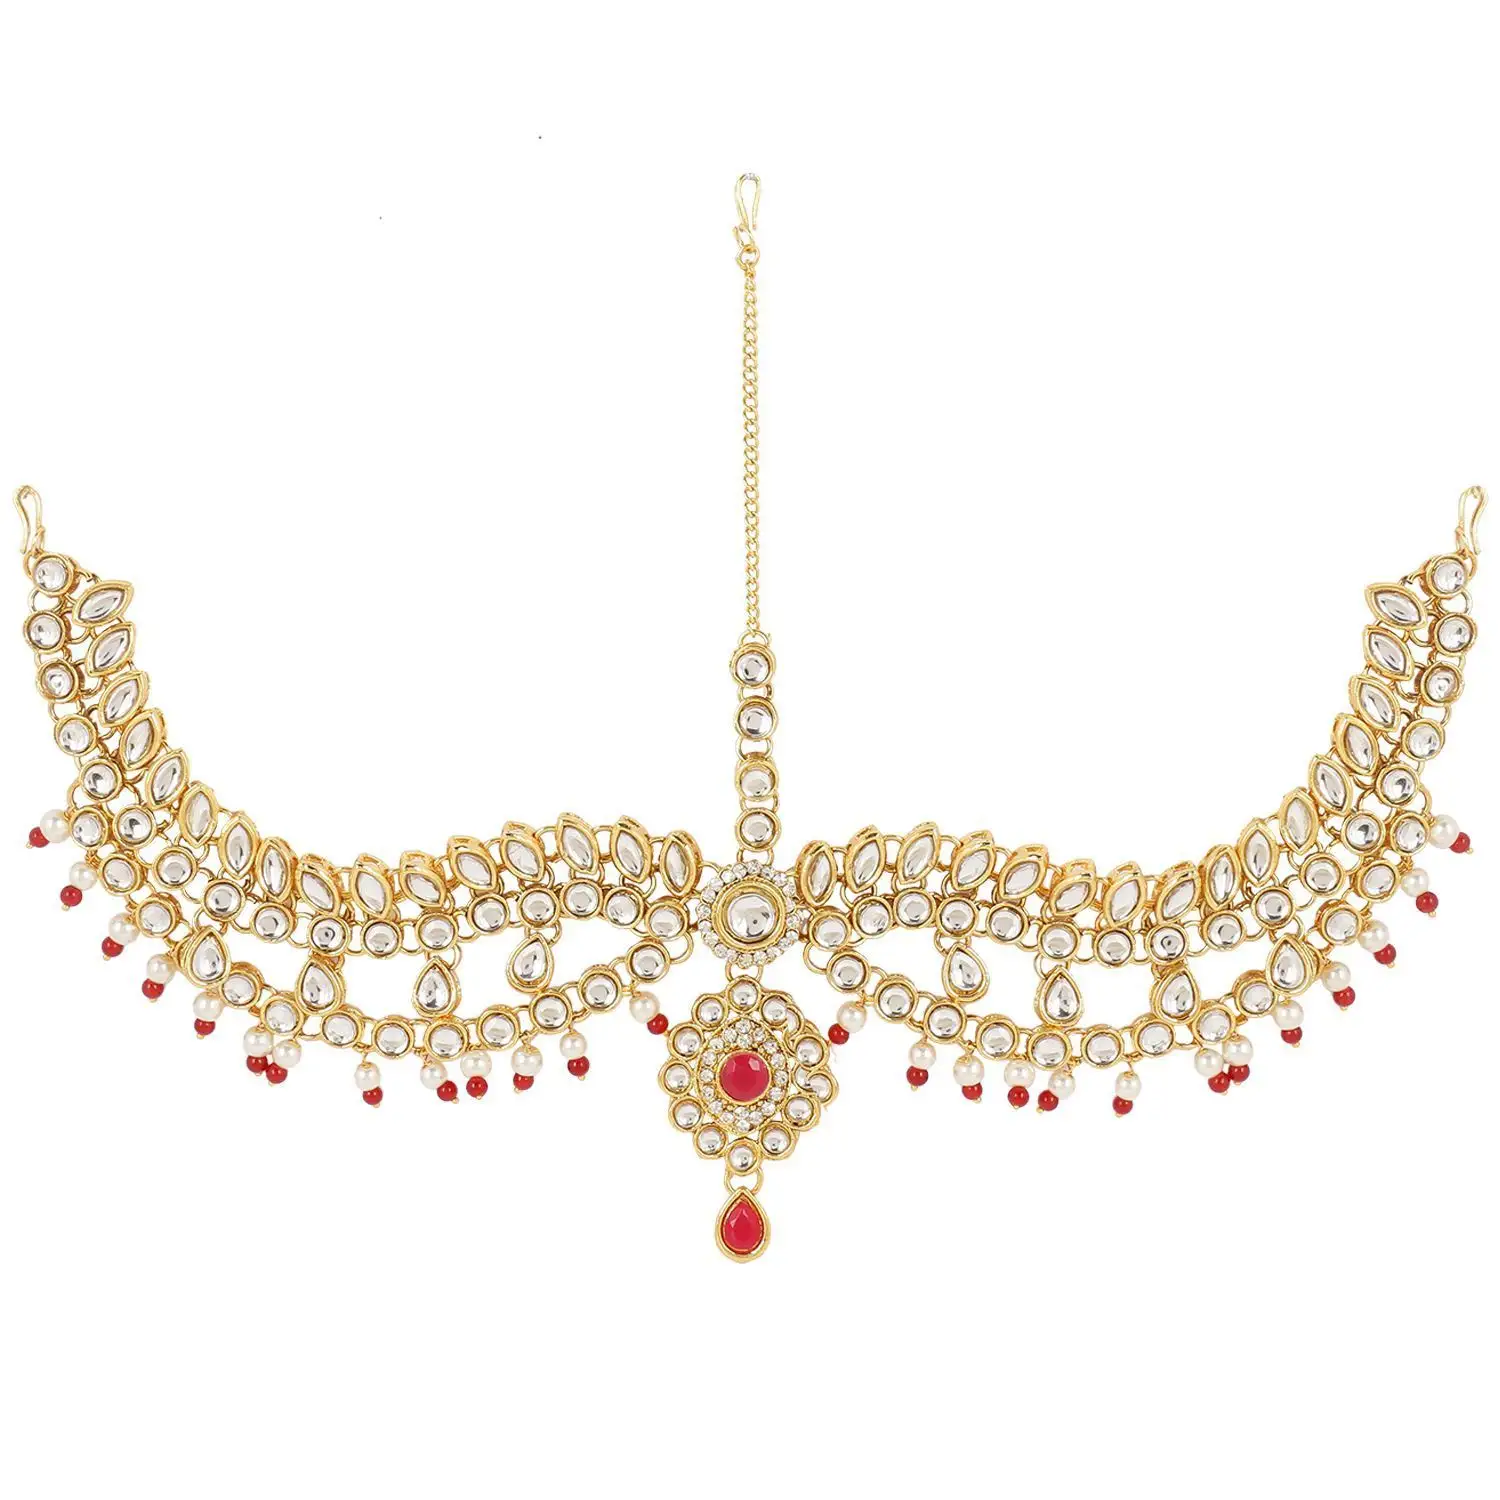 Traditional Indian White and Pink Kundan American Diamond and Pearls Head Jewelry Design for Wedding and Bridal